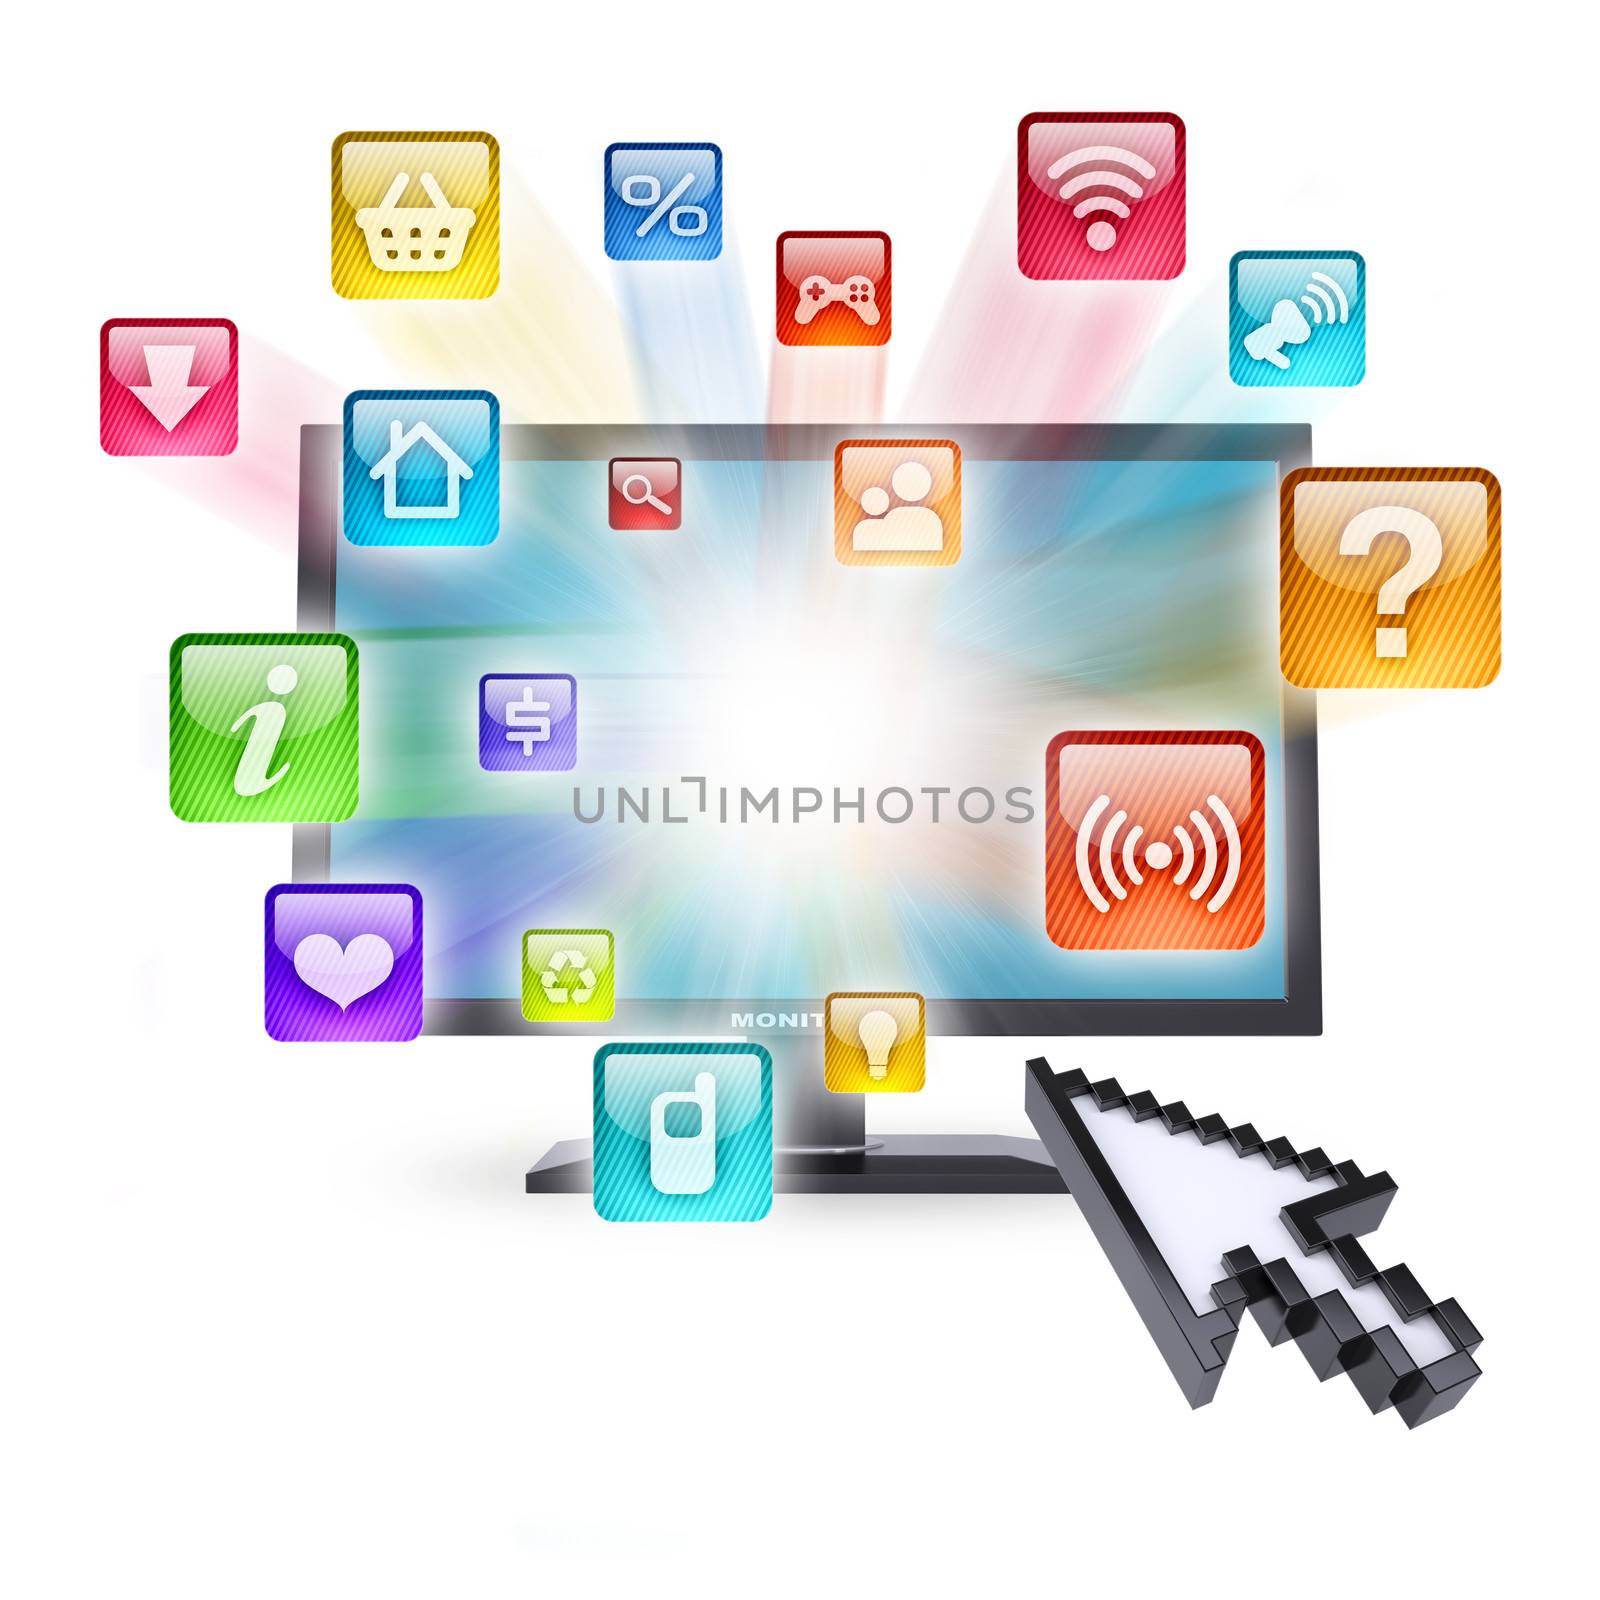 Monitor and application icons. Computer technology concept